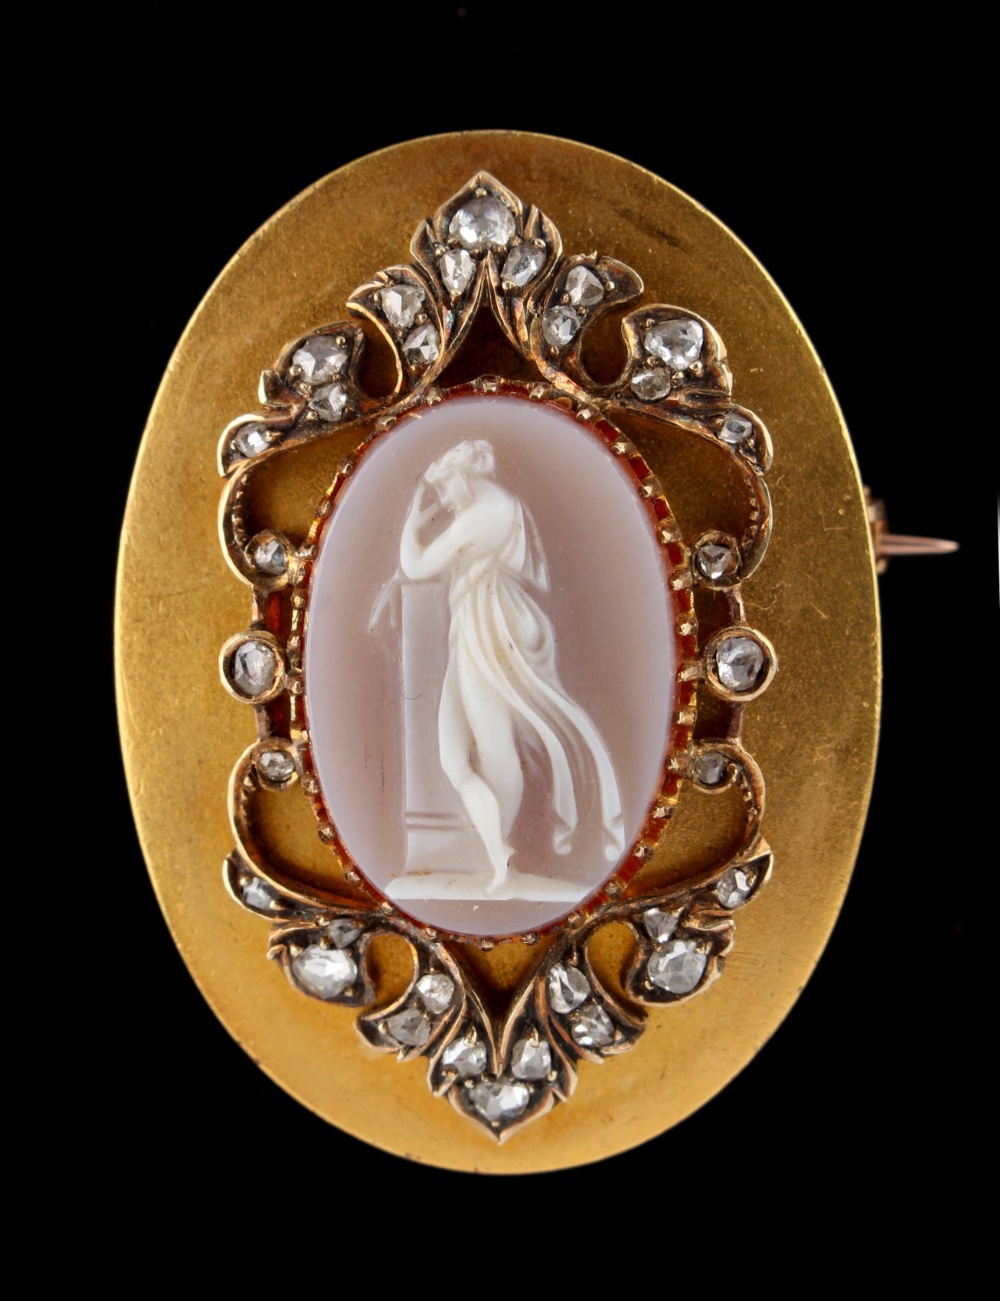 A 19th century Continental yellow gold oval mounted carved oval carnelian agate cameo pendant or